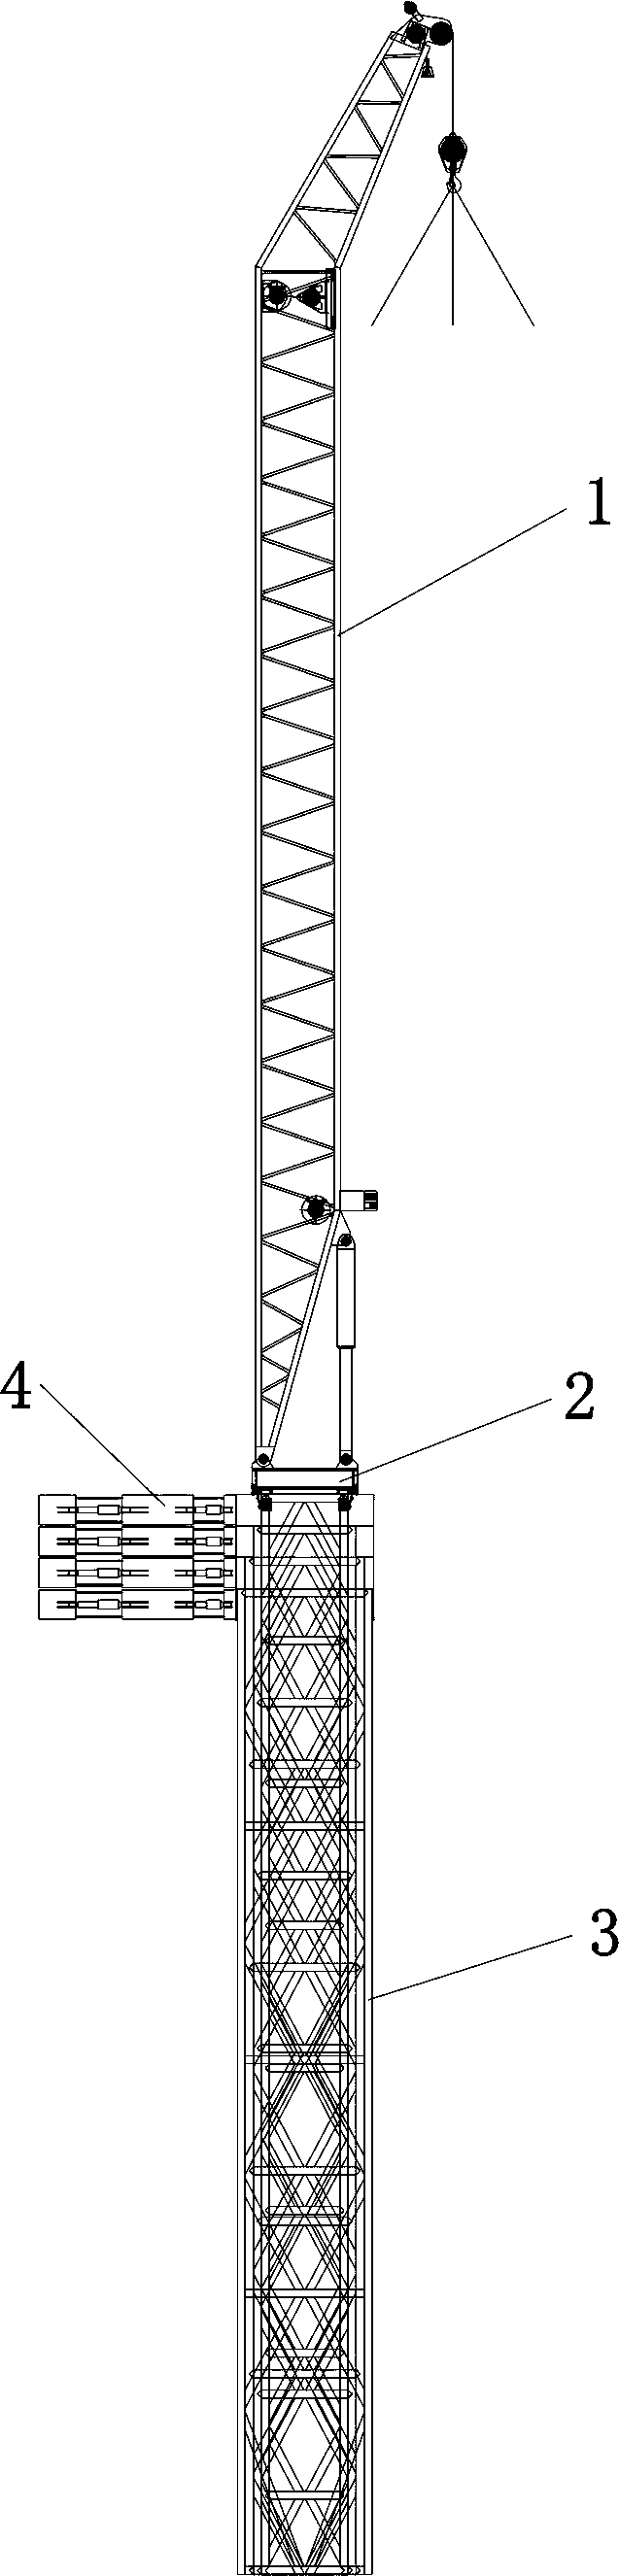 Crane for installing and maintaining wind driven generator